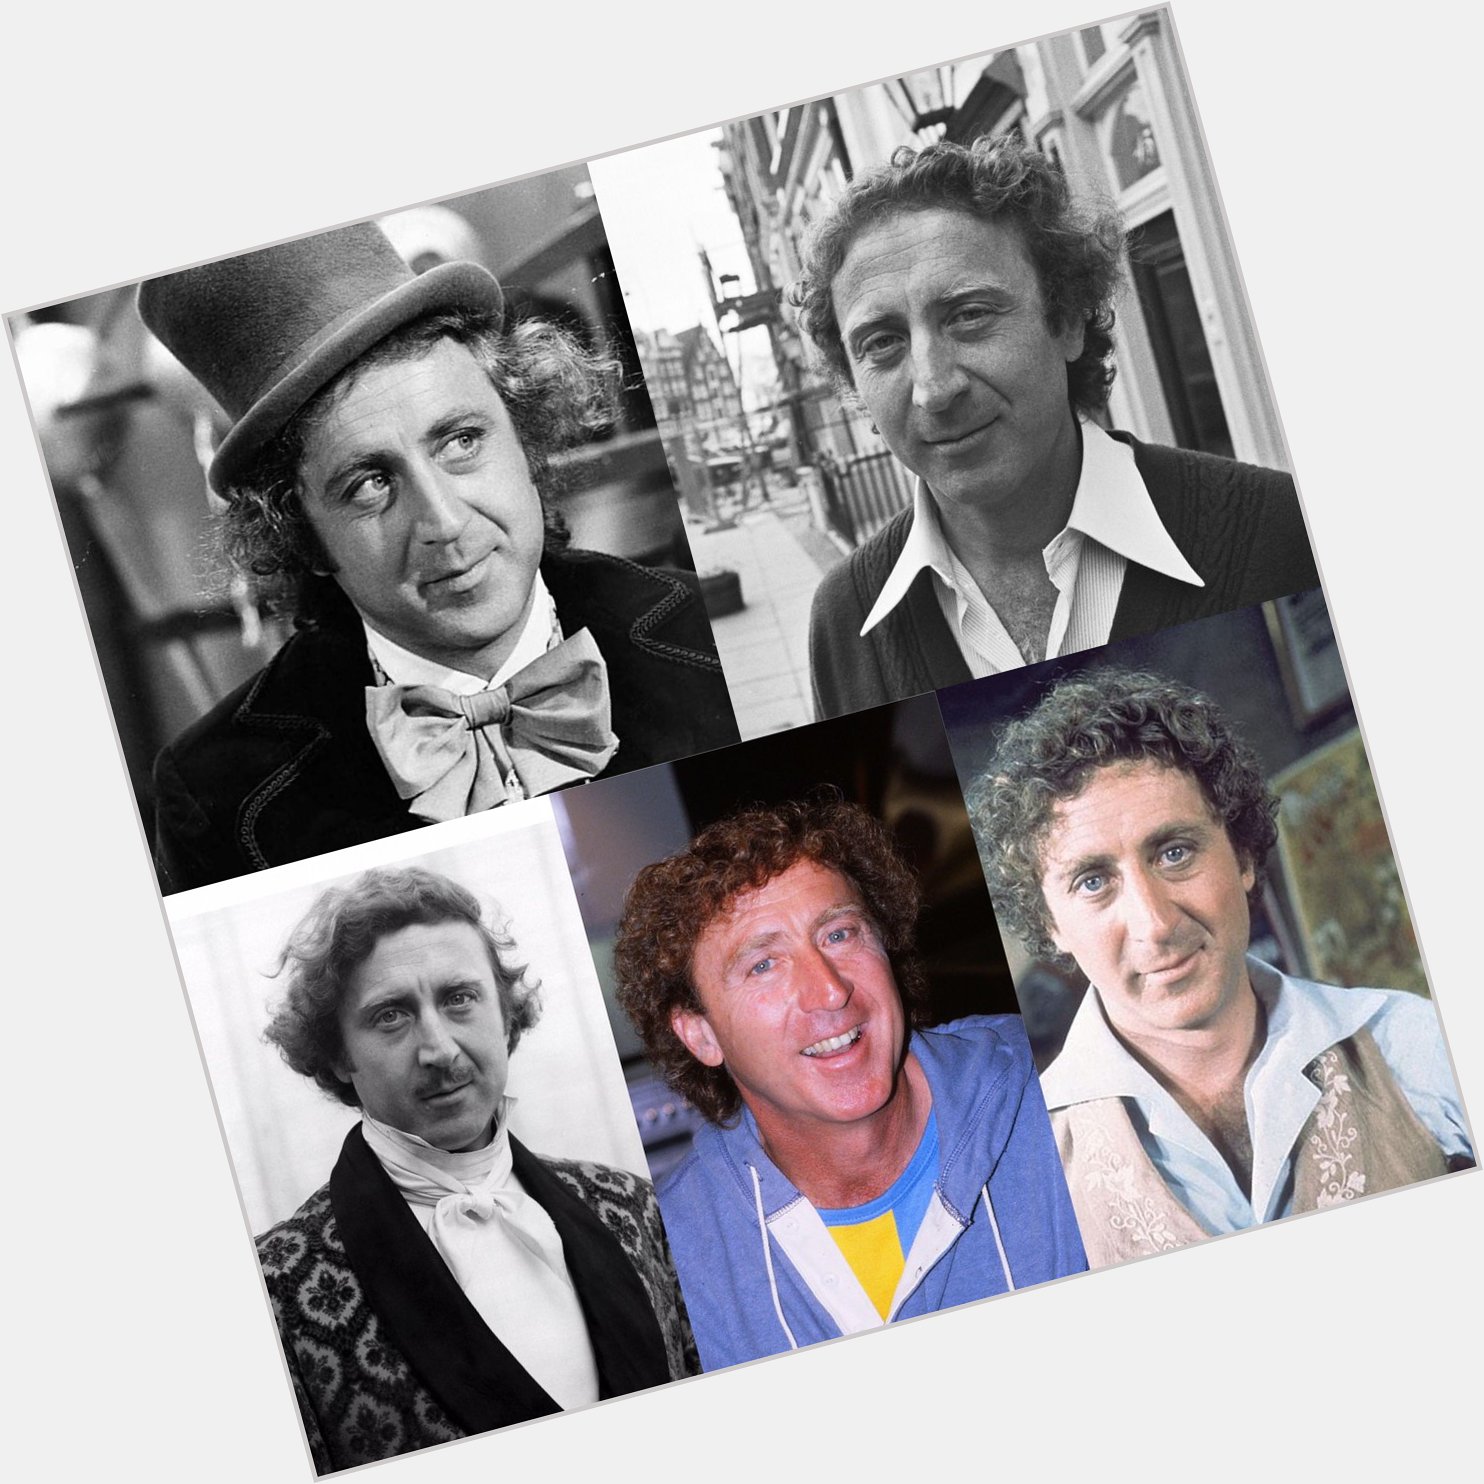 Happy 87 birthday to Gene Wilder up in heaven. May he Rest In Peace.  